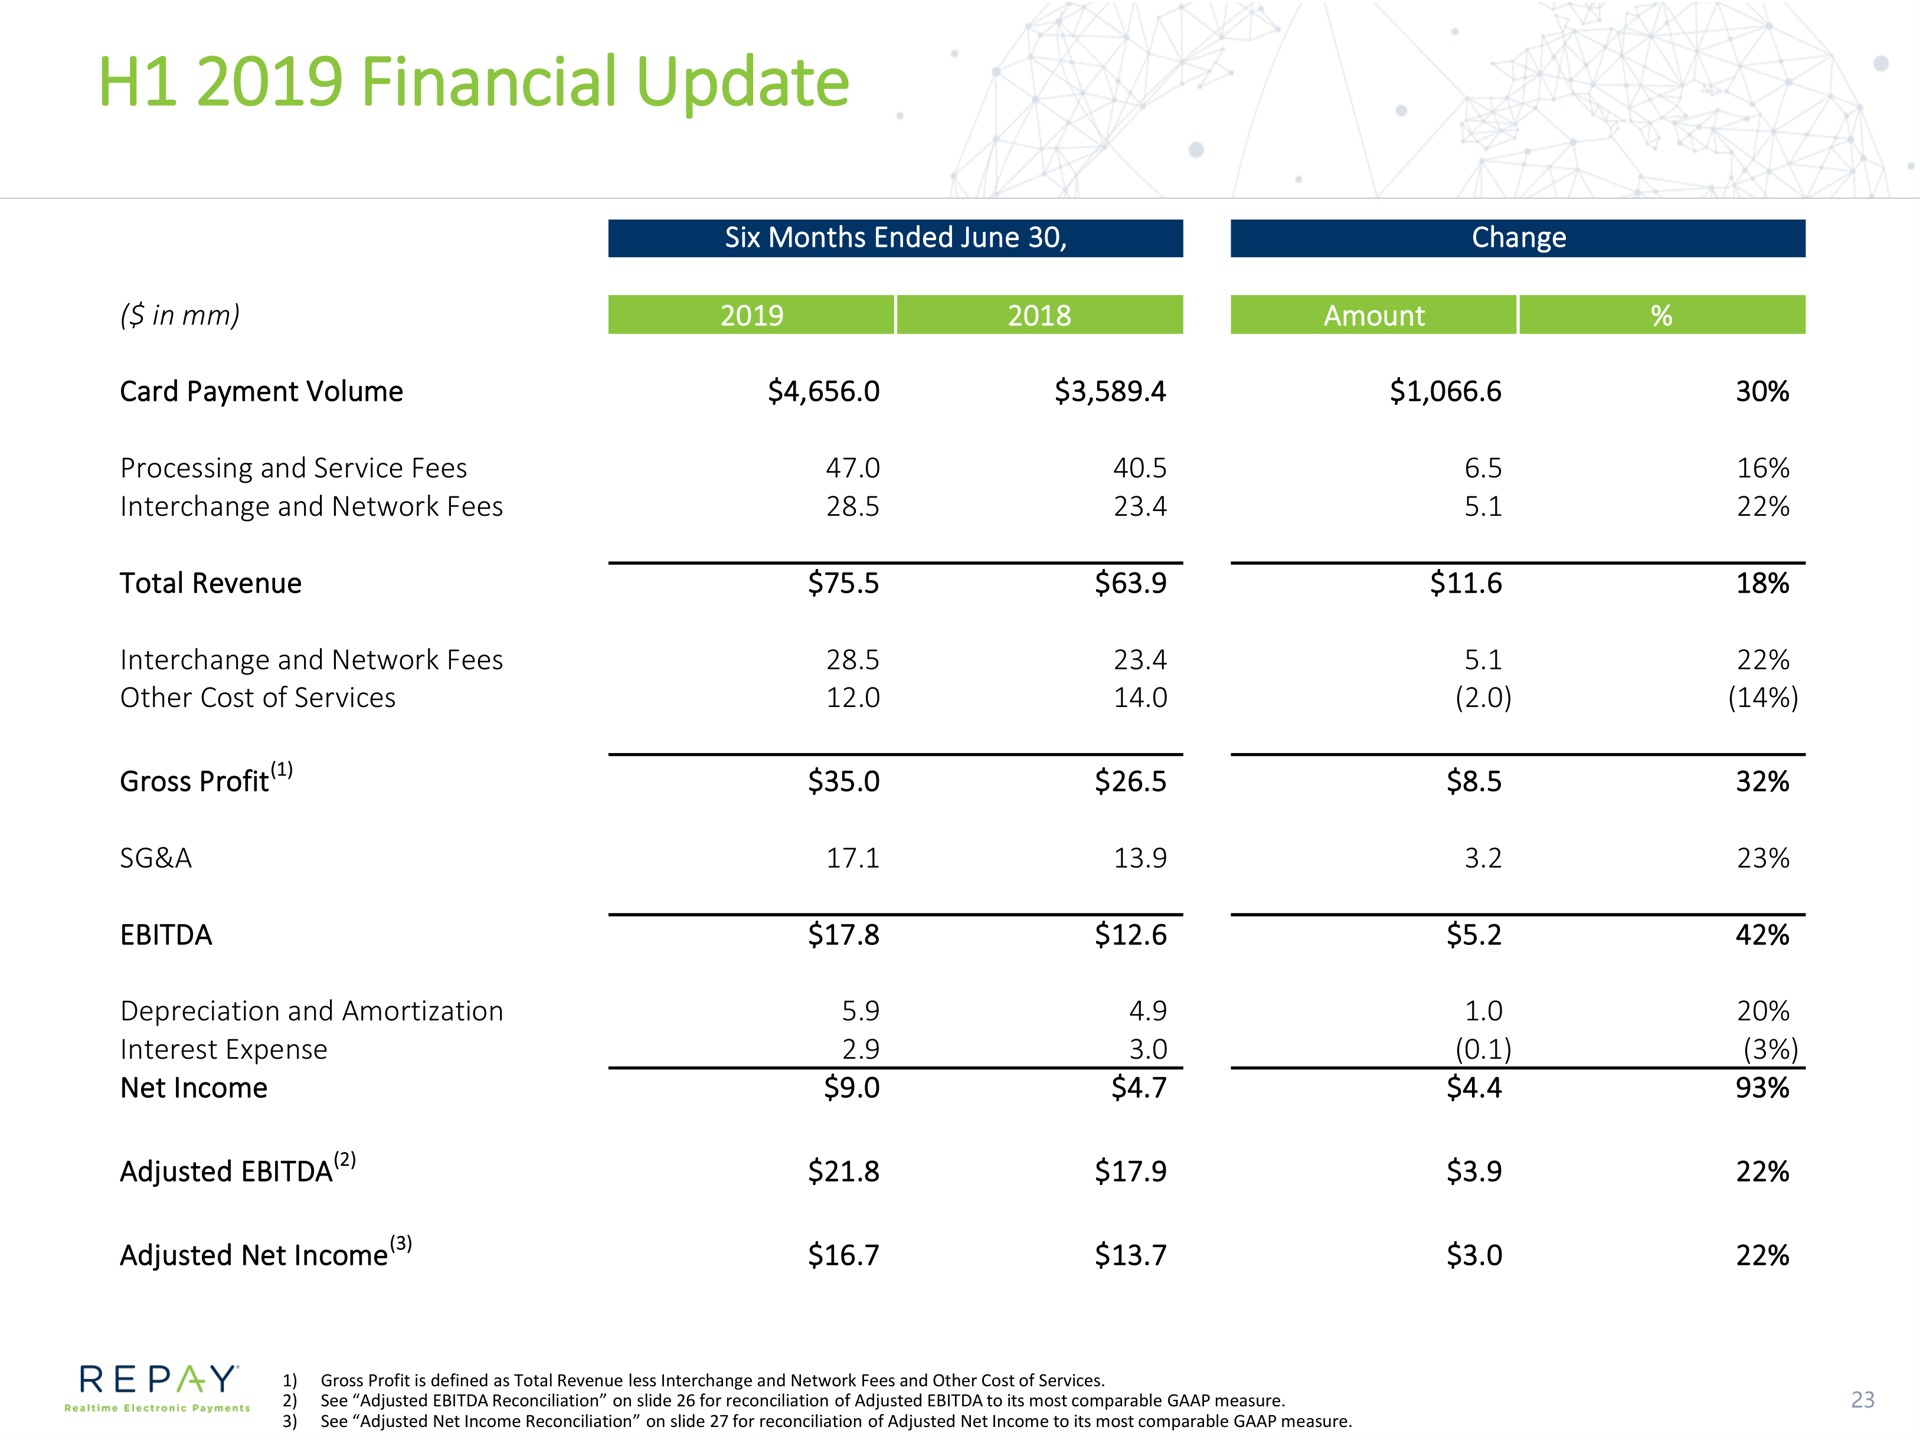 financial update six months ended june adjusted net income | Repay